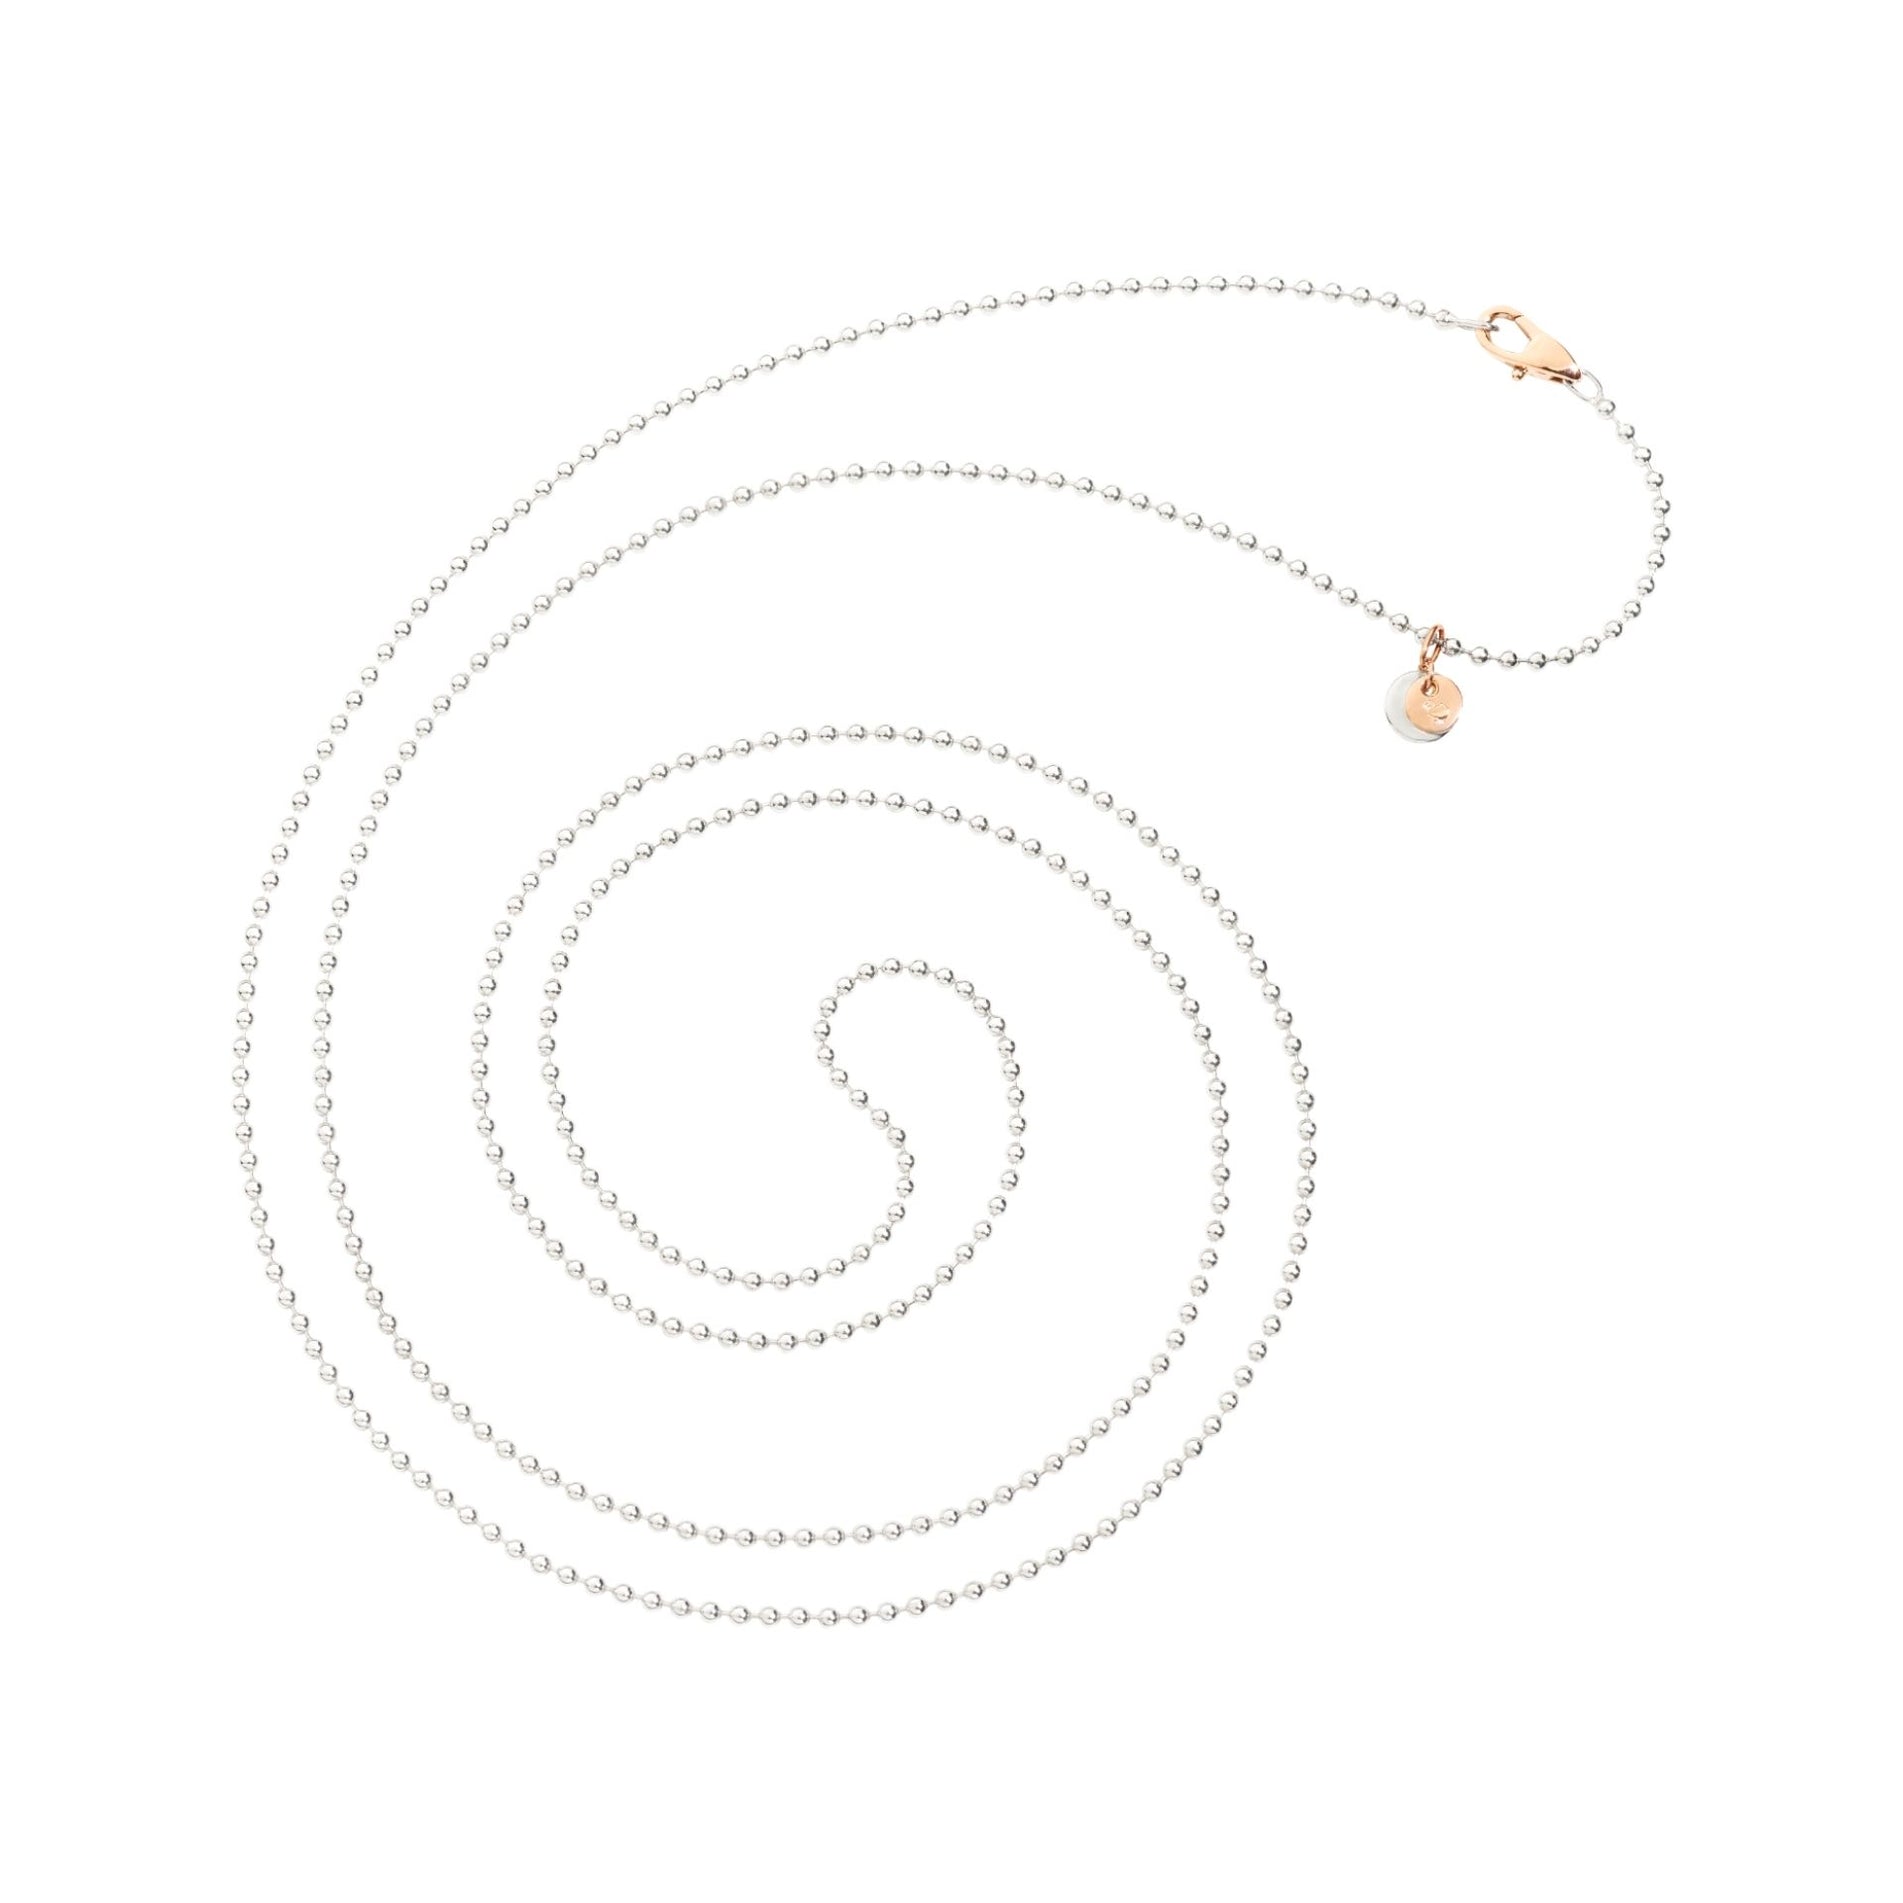 DoDo Bollicine Necklace in Silver with 9k Rose Gold Clasp - Orsini Jewellers NZ